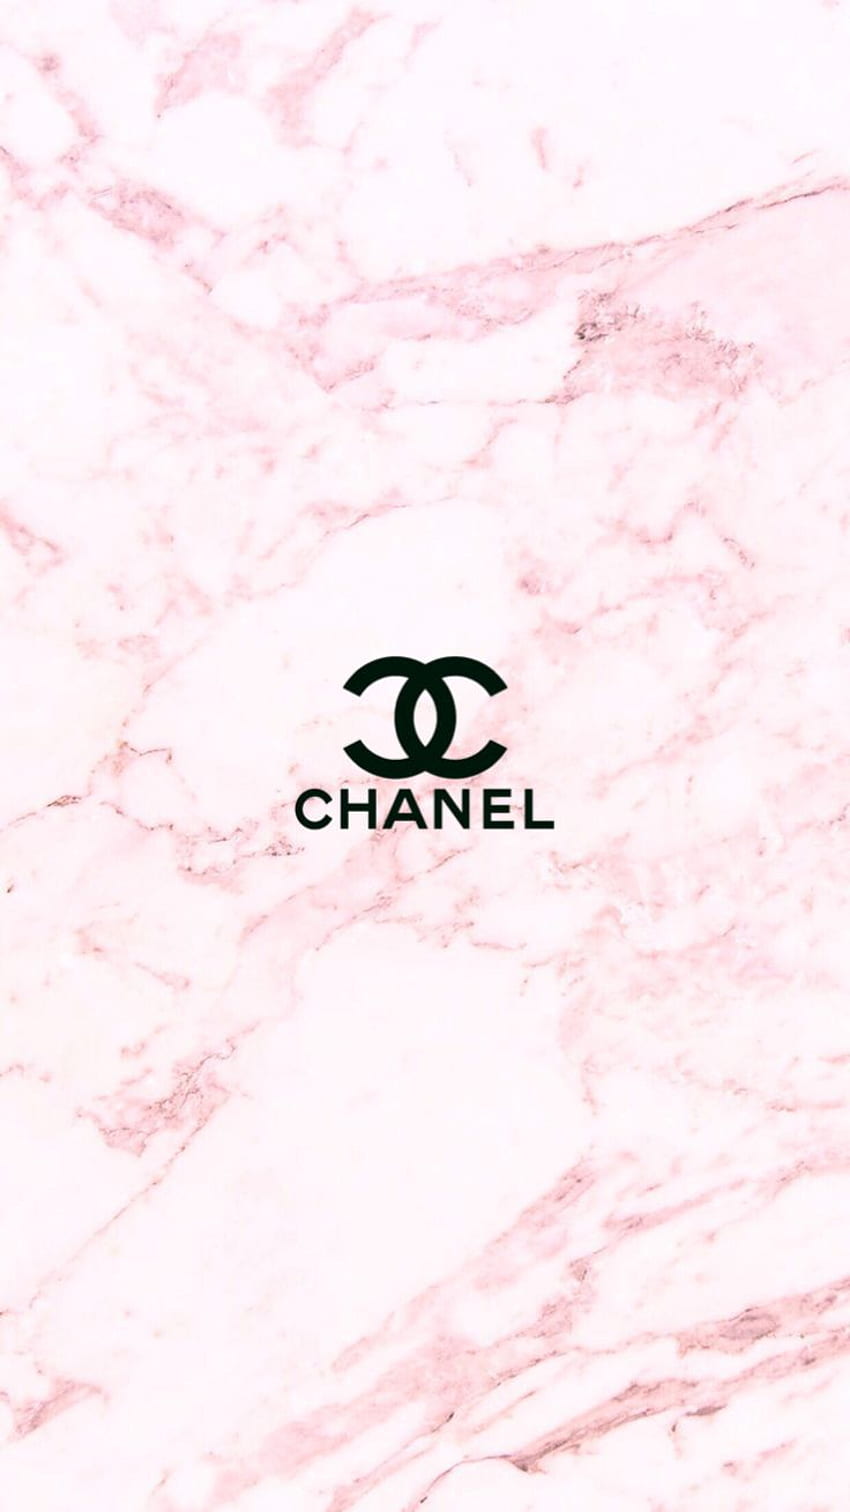 Aesthetic wallpaper for phone, chanel logo on a pink marble background - Chanel